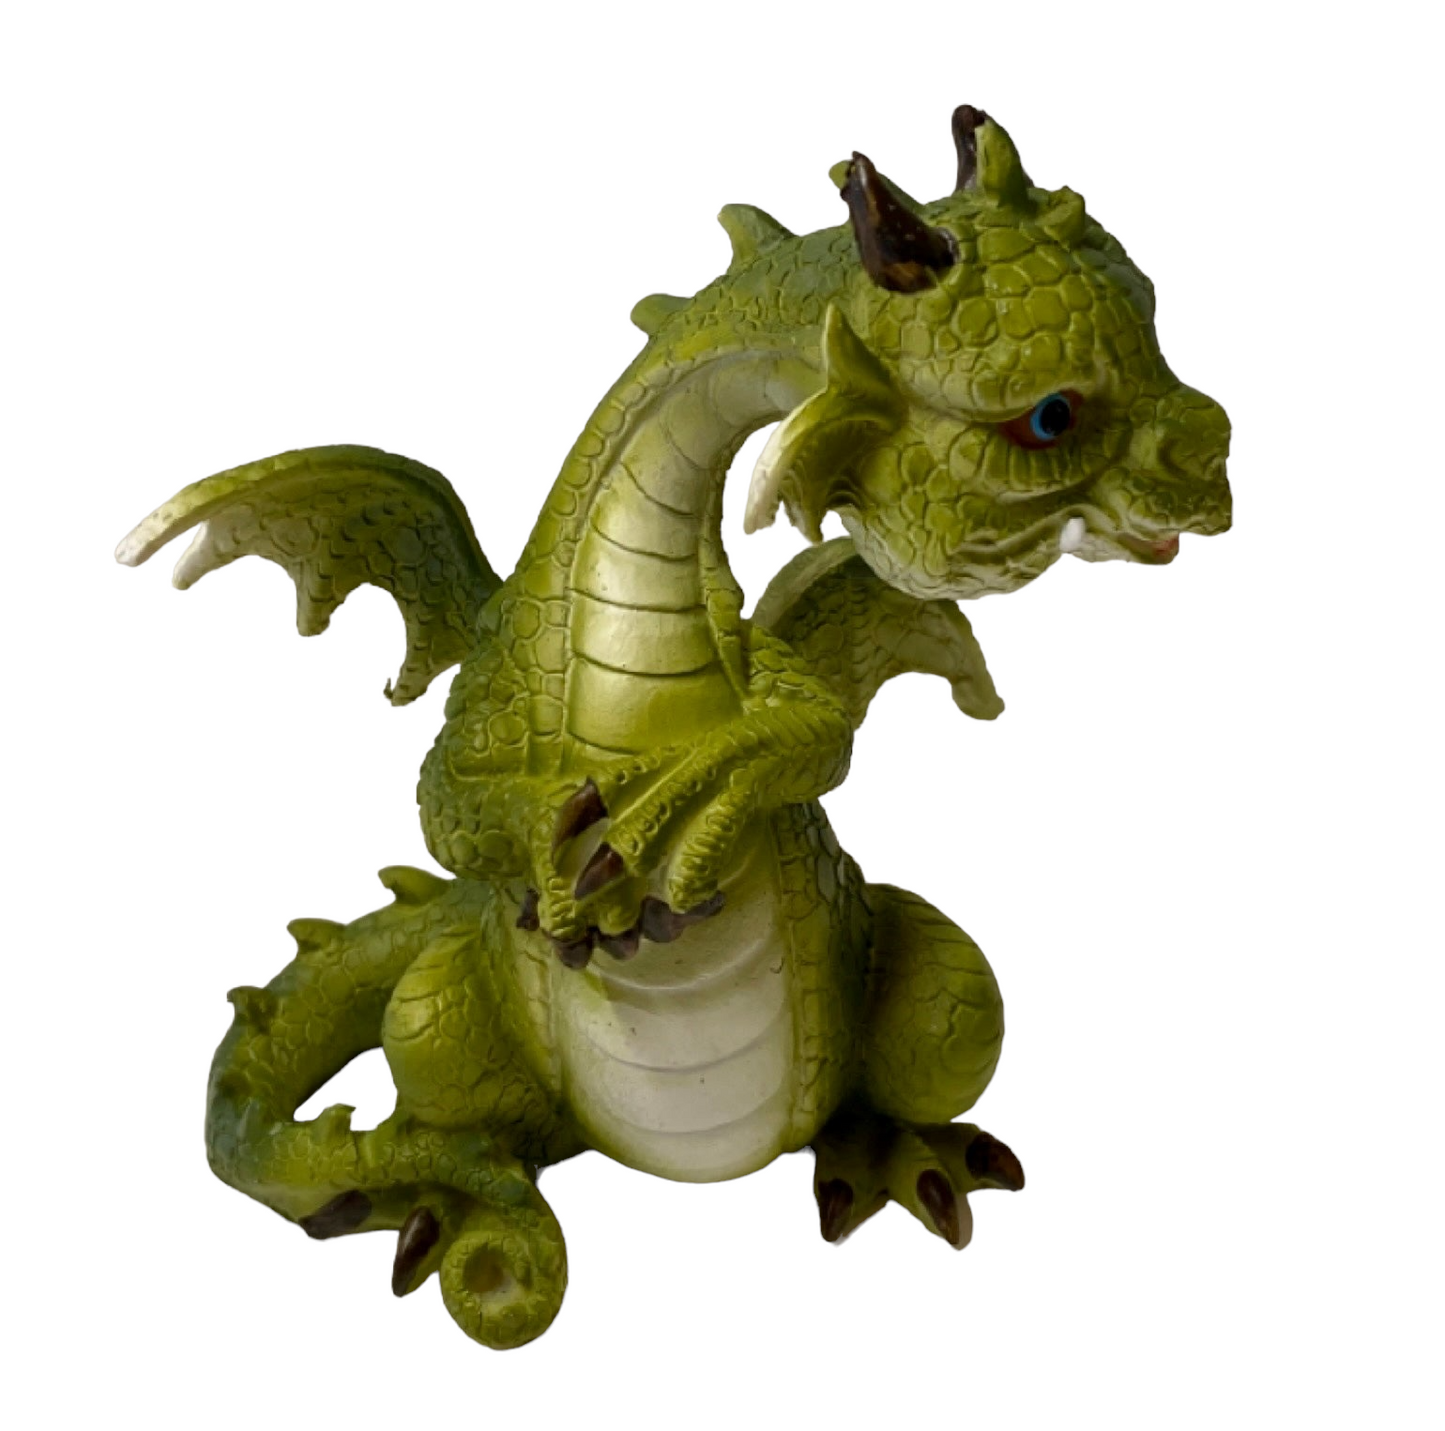 Dragon Cheeky Shy Ornament - The Renmy Store Homewares & Gifts 